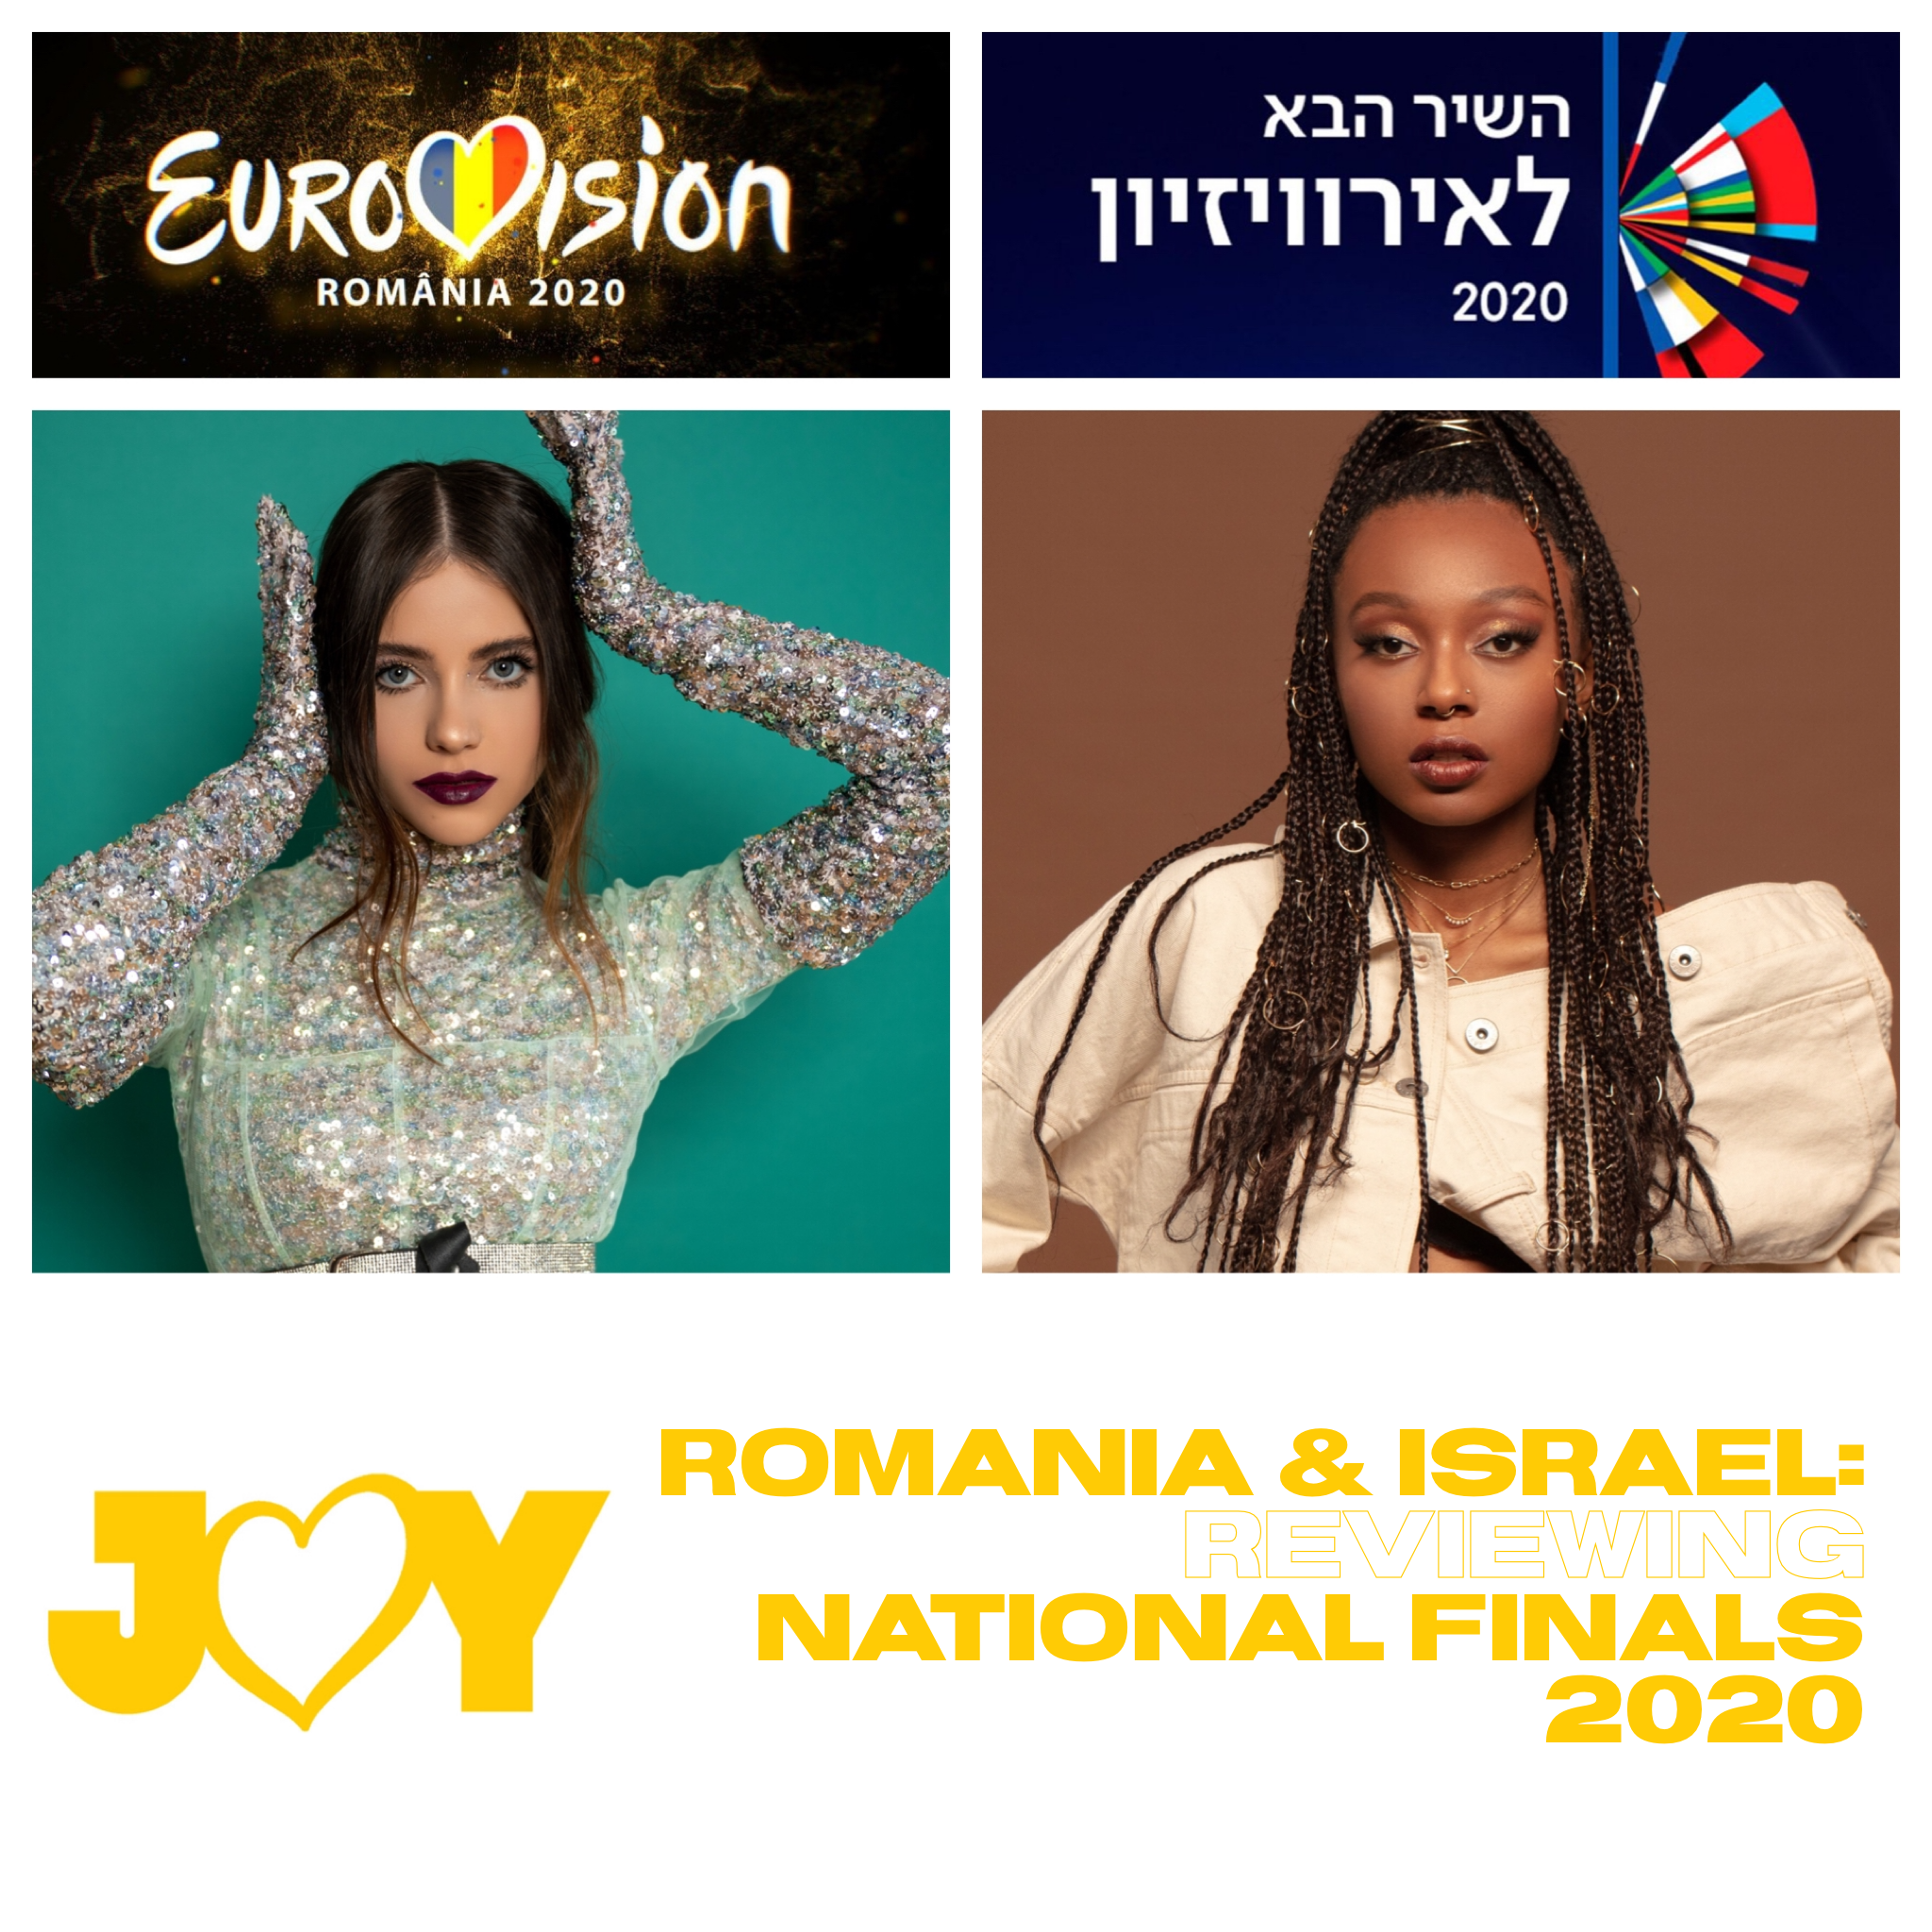 Israel and Romania – Have artist, will travel: Reviewing HaShir HaBa L’Eurovizion and Selecția Națională 2020